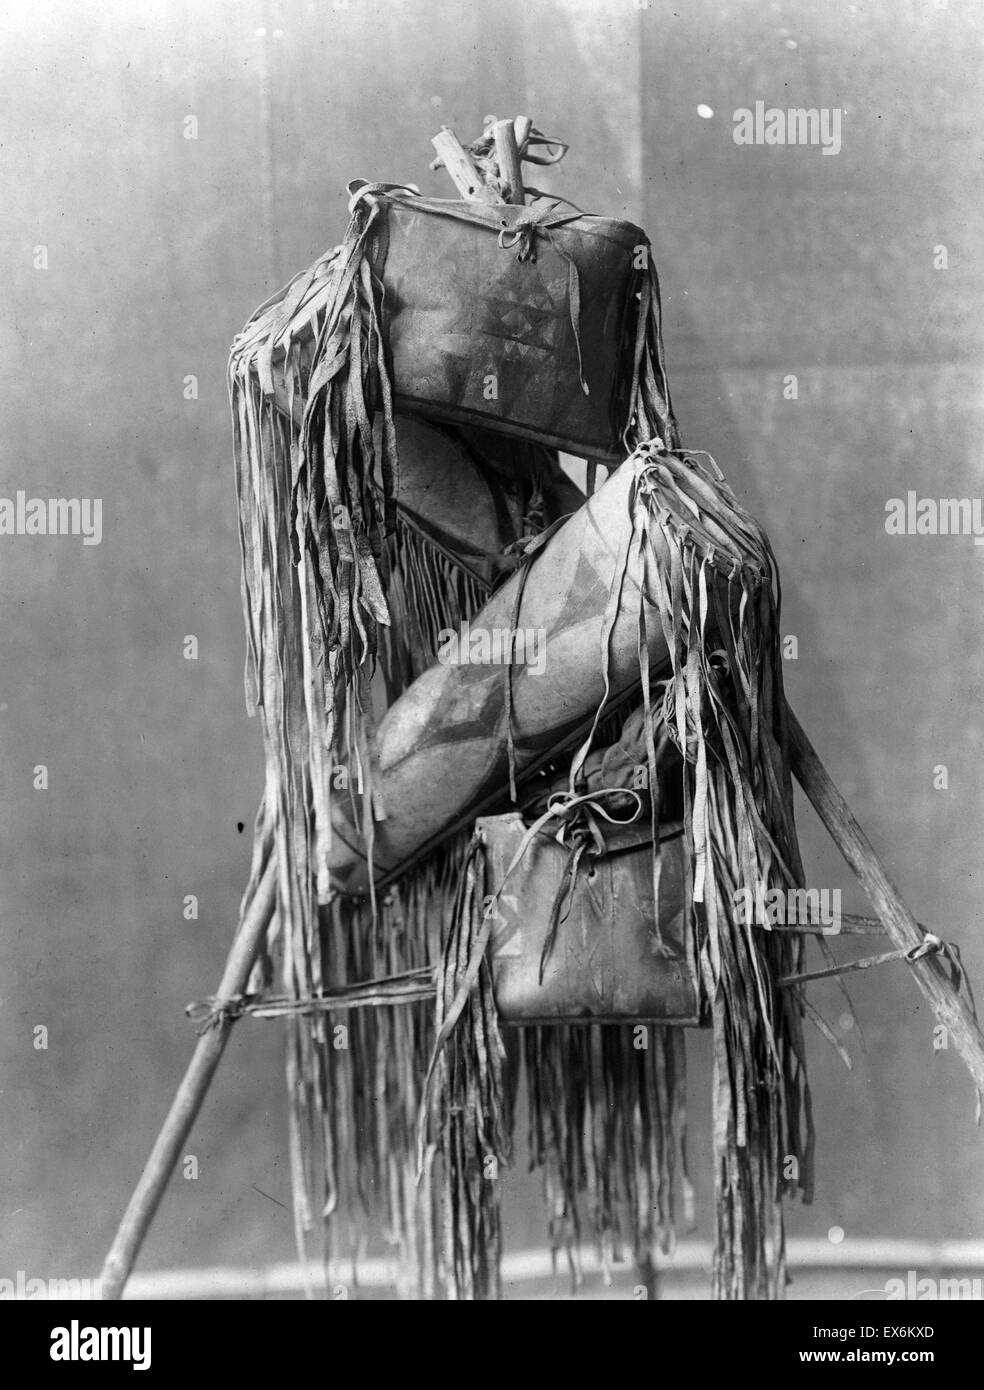 Four Native American Piegan fringed leather Medicine bags hung on tripod. By Edward Curtis 1868-1952, photographer 1910 Stock Photo